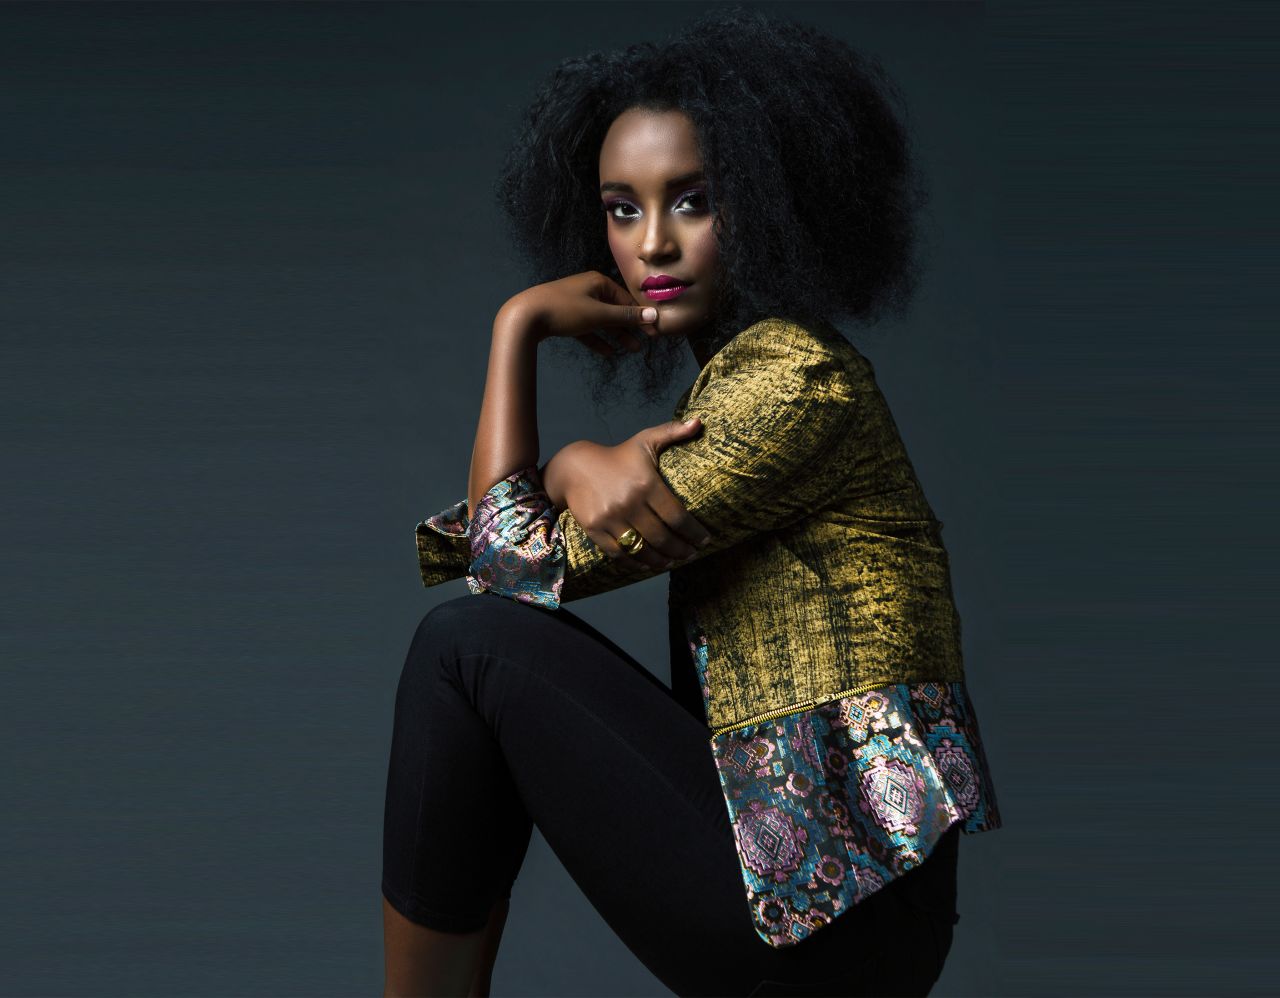 "We are trying to make fashion made in Africa available to everybody," says Chekwas Okafor, founder of ONYCHEK. The 27-year-old left a job as a health and safety manager to launch the online retail store. <br /><br />Pictured: Designs by Ghana's Christie Brown and Kenya-based Adele Dejak.